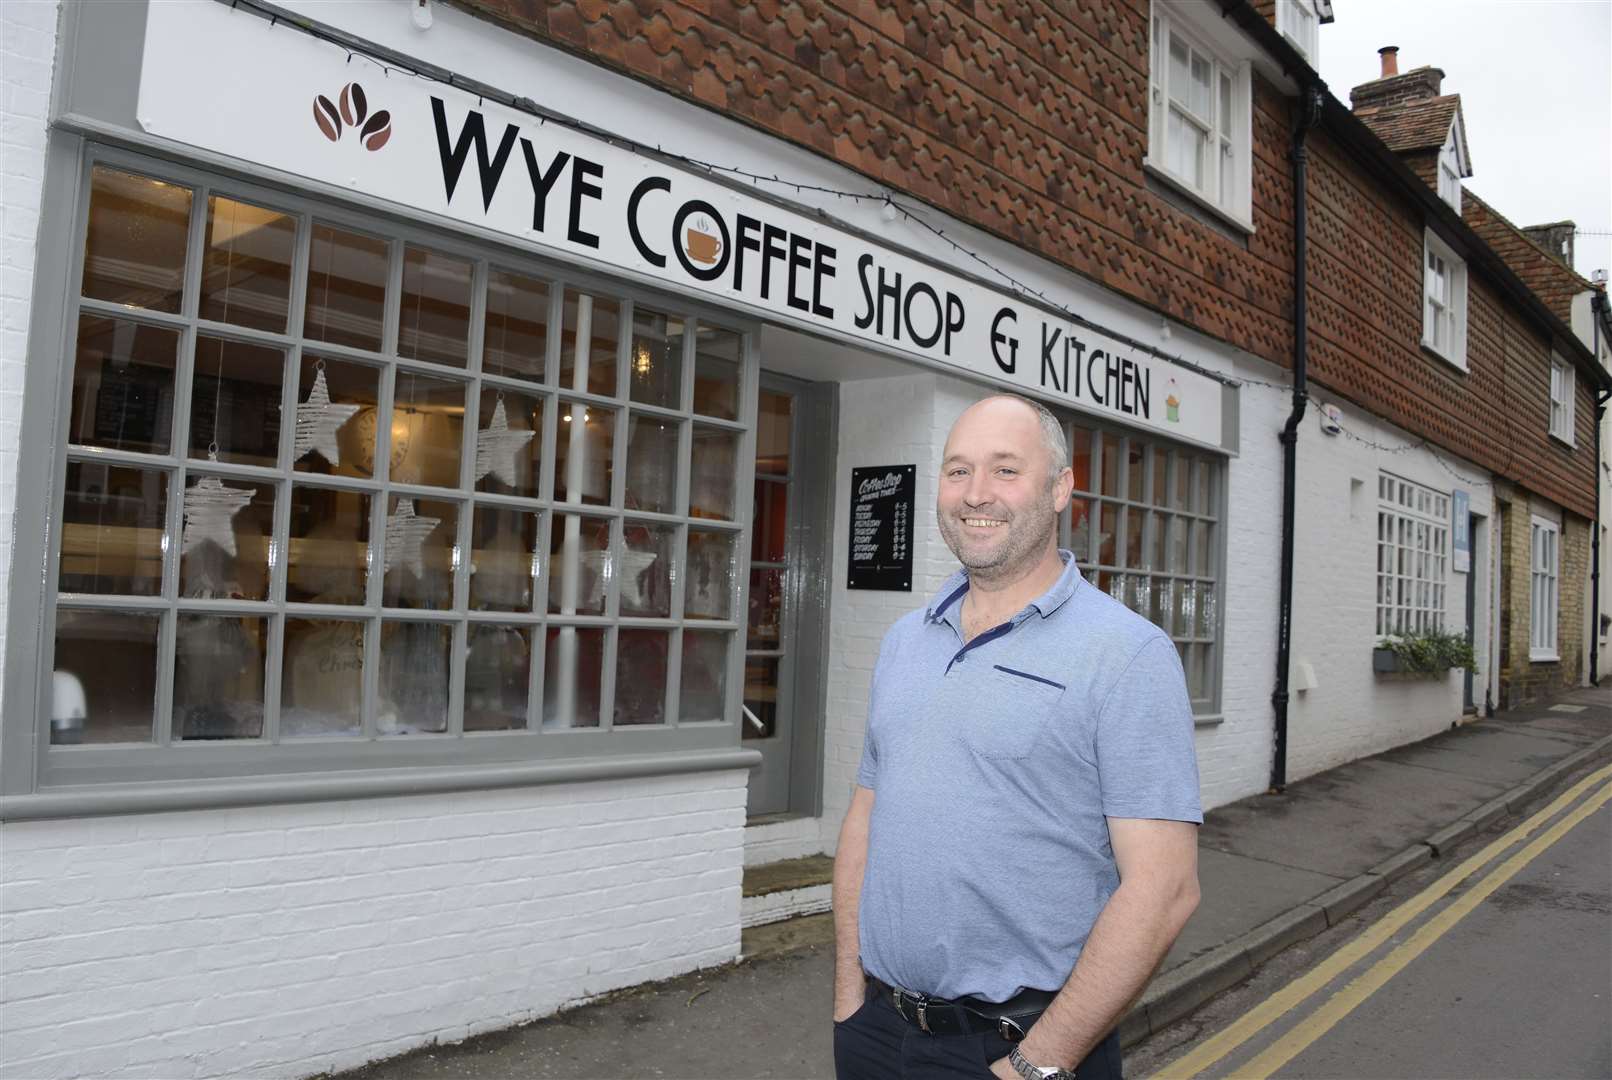 Howard Lapish opened Wye Coffee Shop and Kitchen in Church Street in 2015